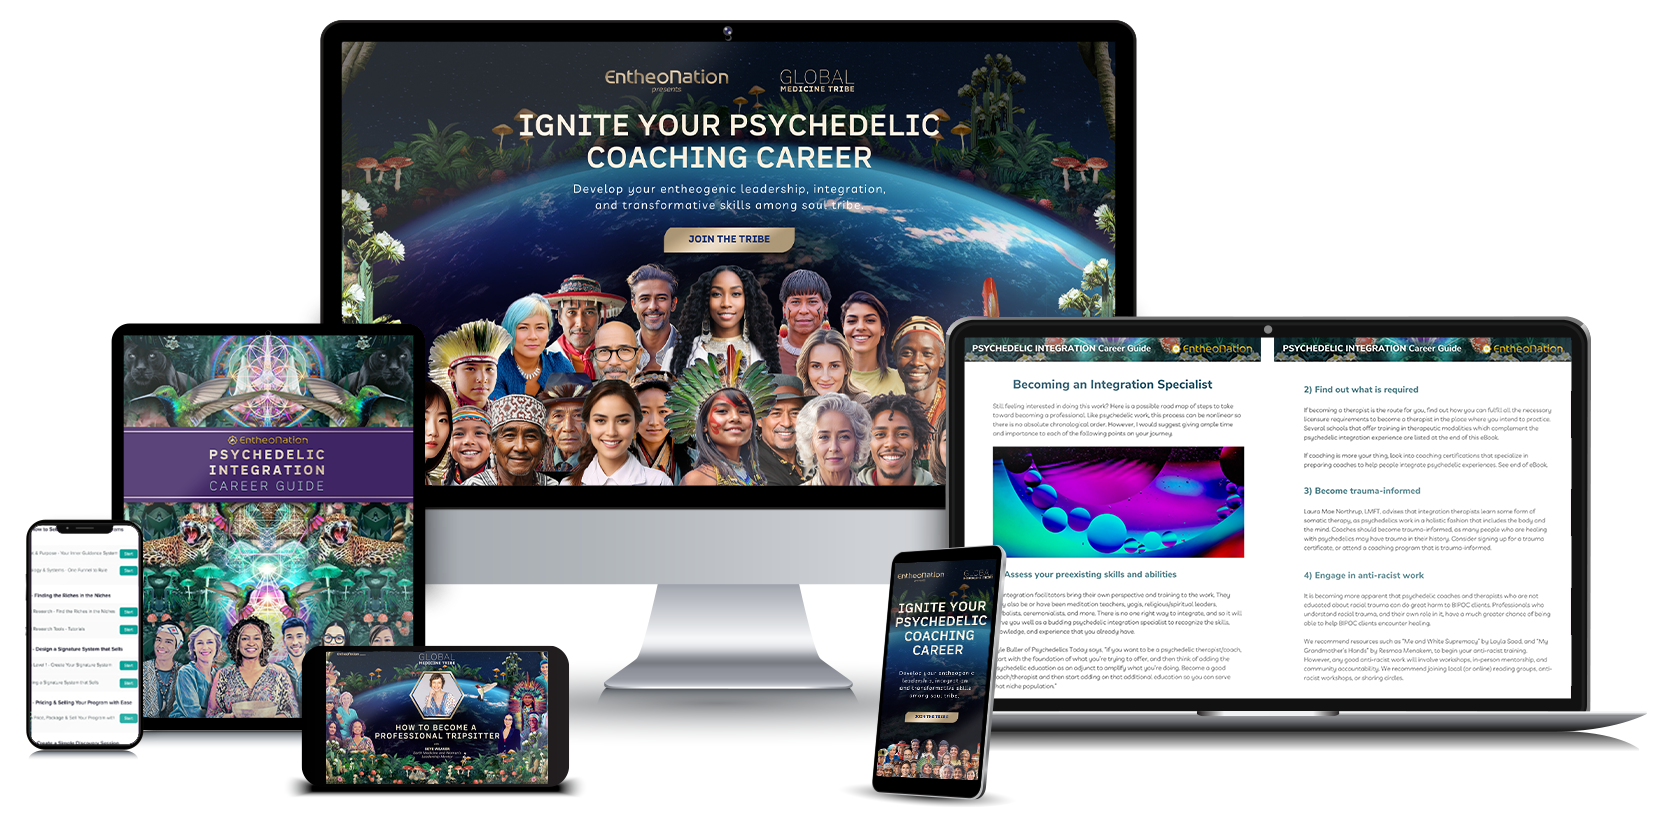 Ignite Your Psychedelic Coaching Career